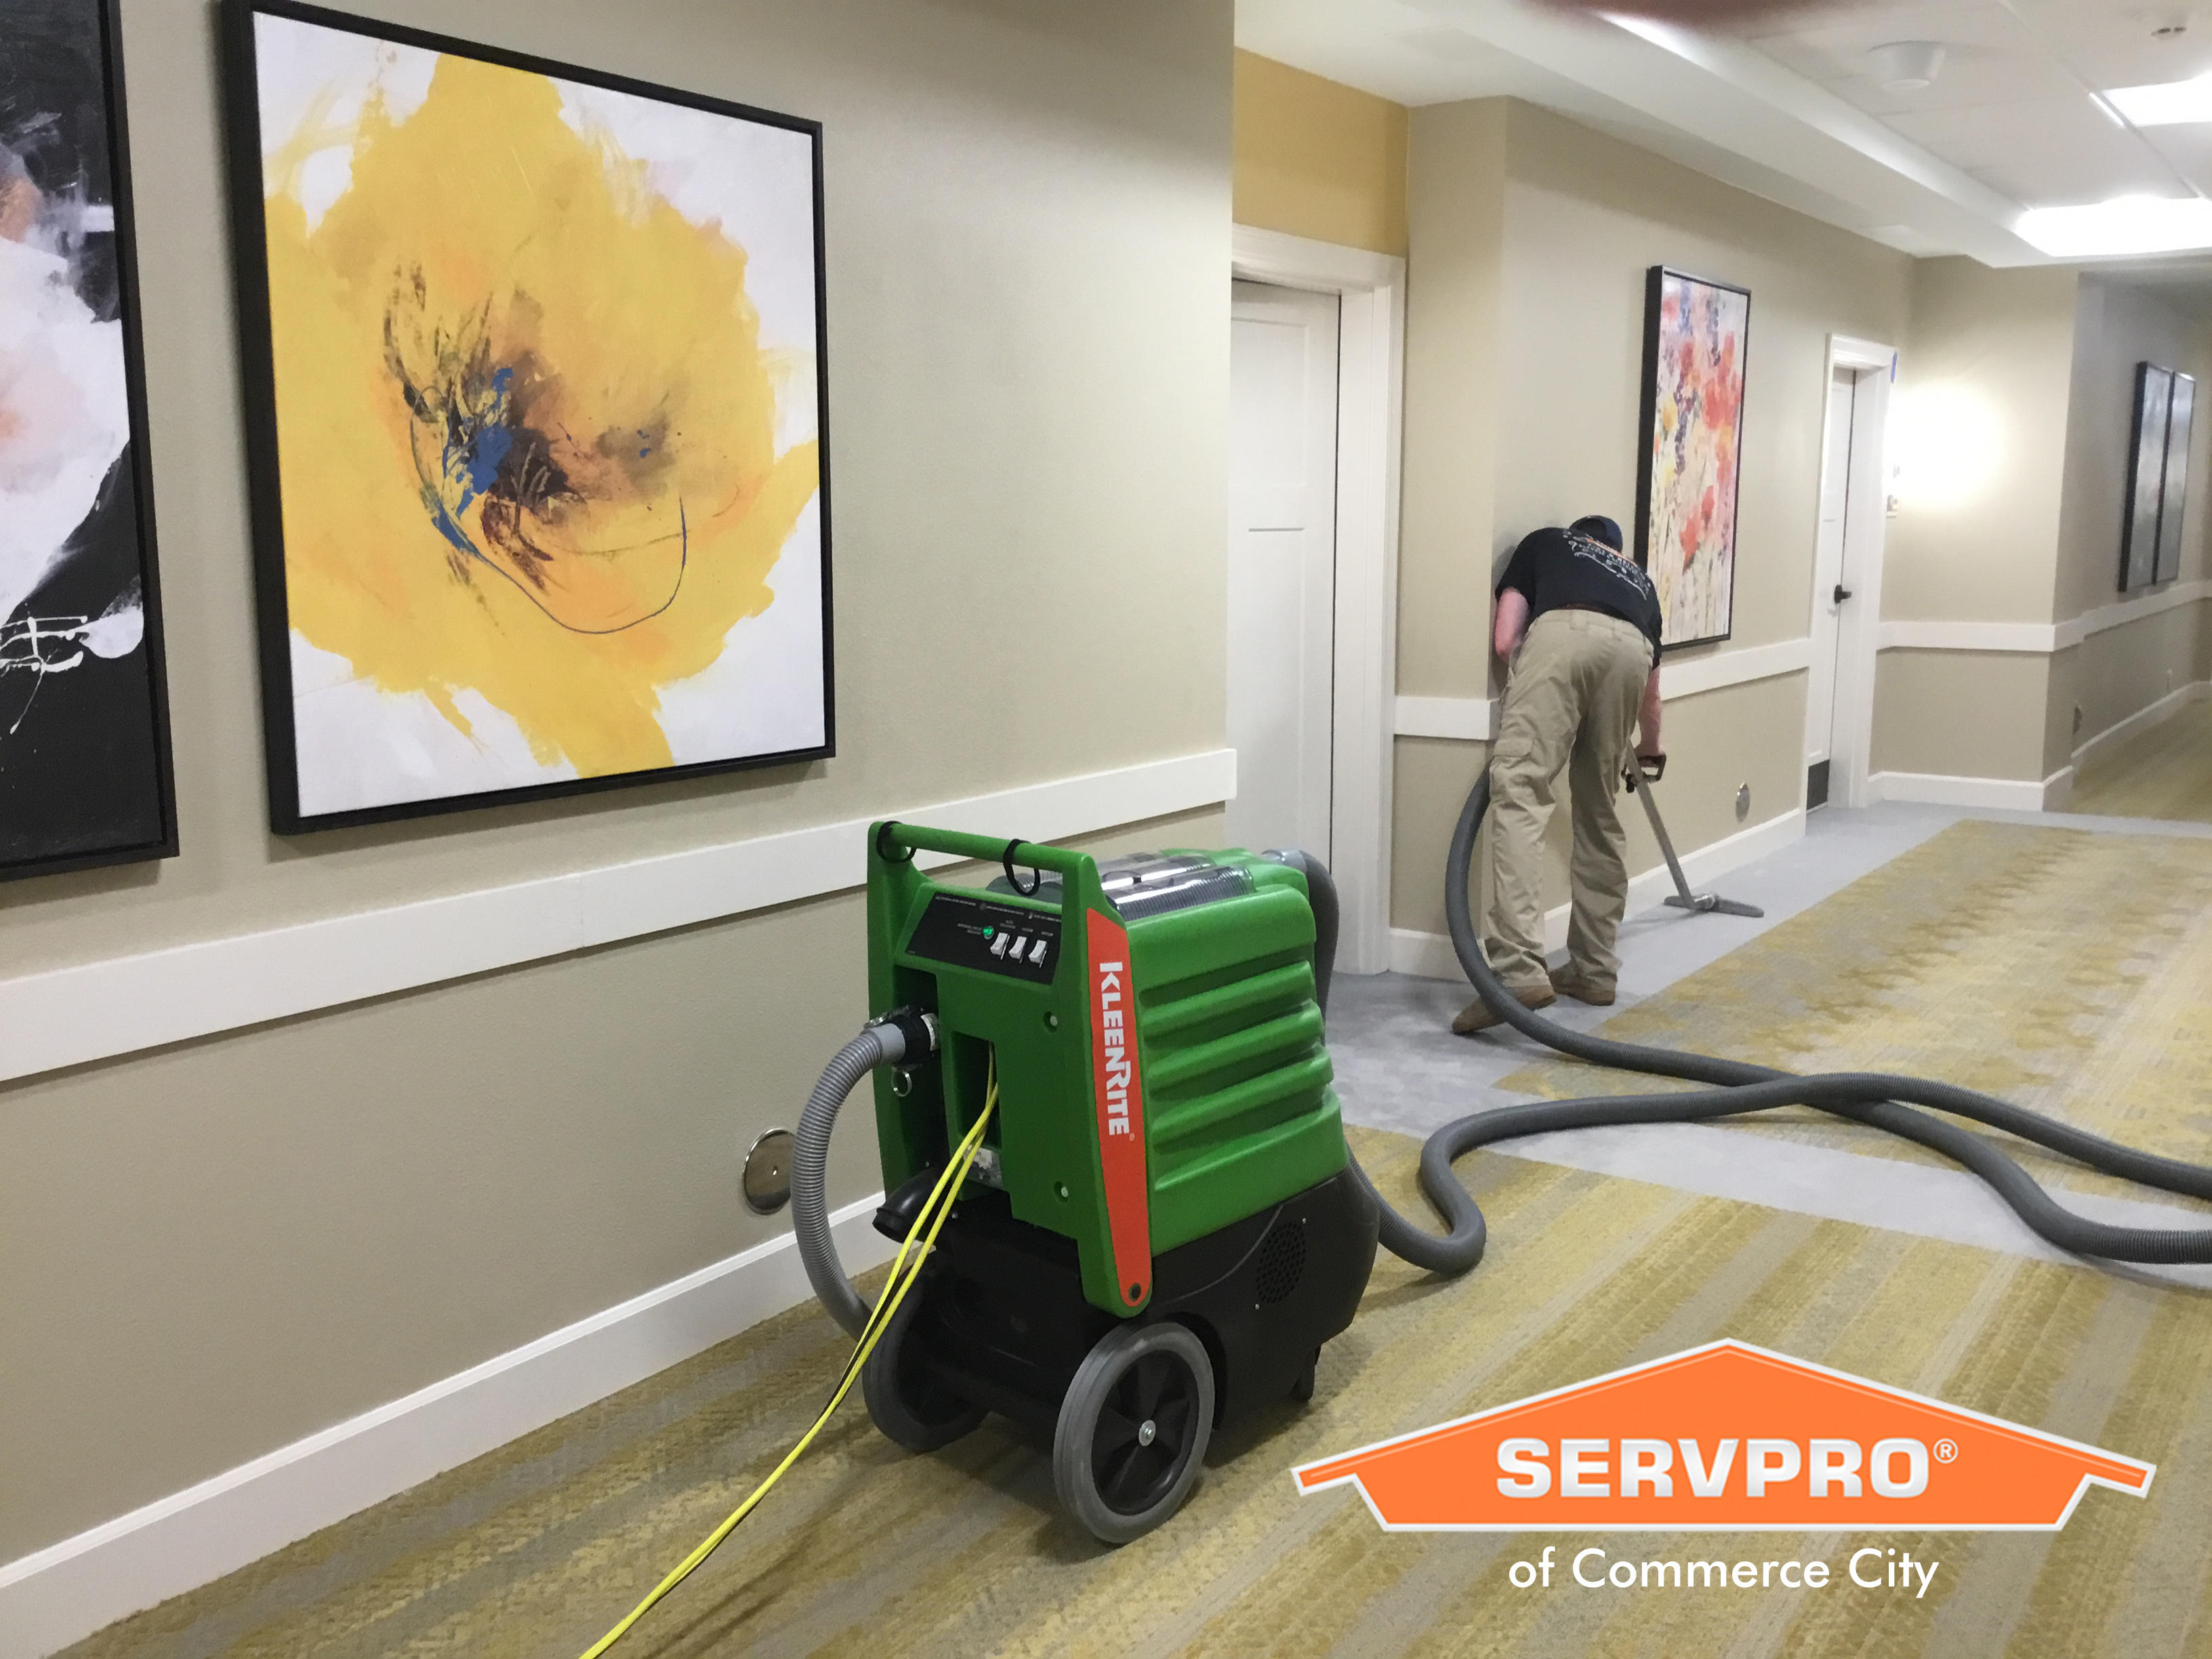 Whether your water emergency occurs in a small office building or big box store, we will respond quickly to mitigate the damage and manage the restoration project through to its completion.